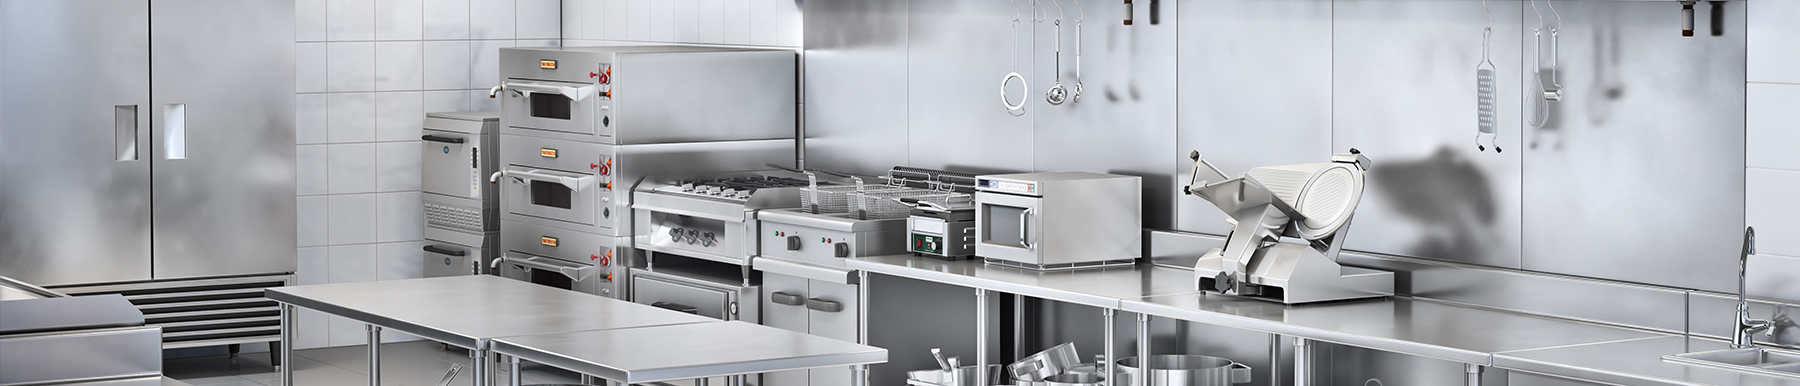 Catering Equipment Suppliers Bradford | H2 Catering Equipment Catering Equipment